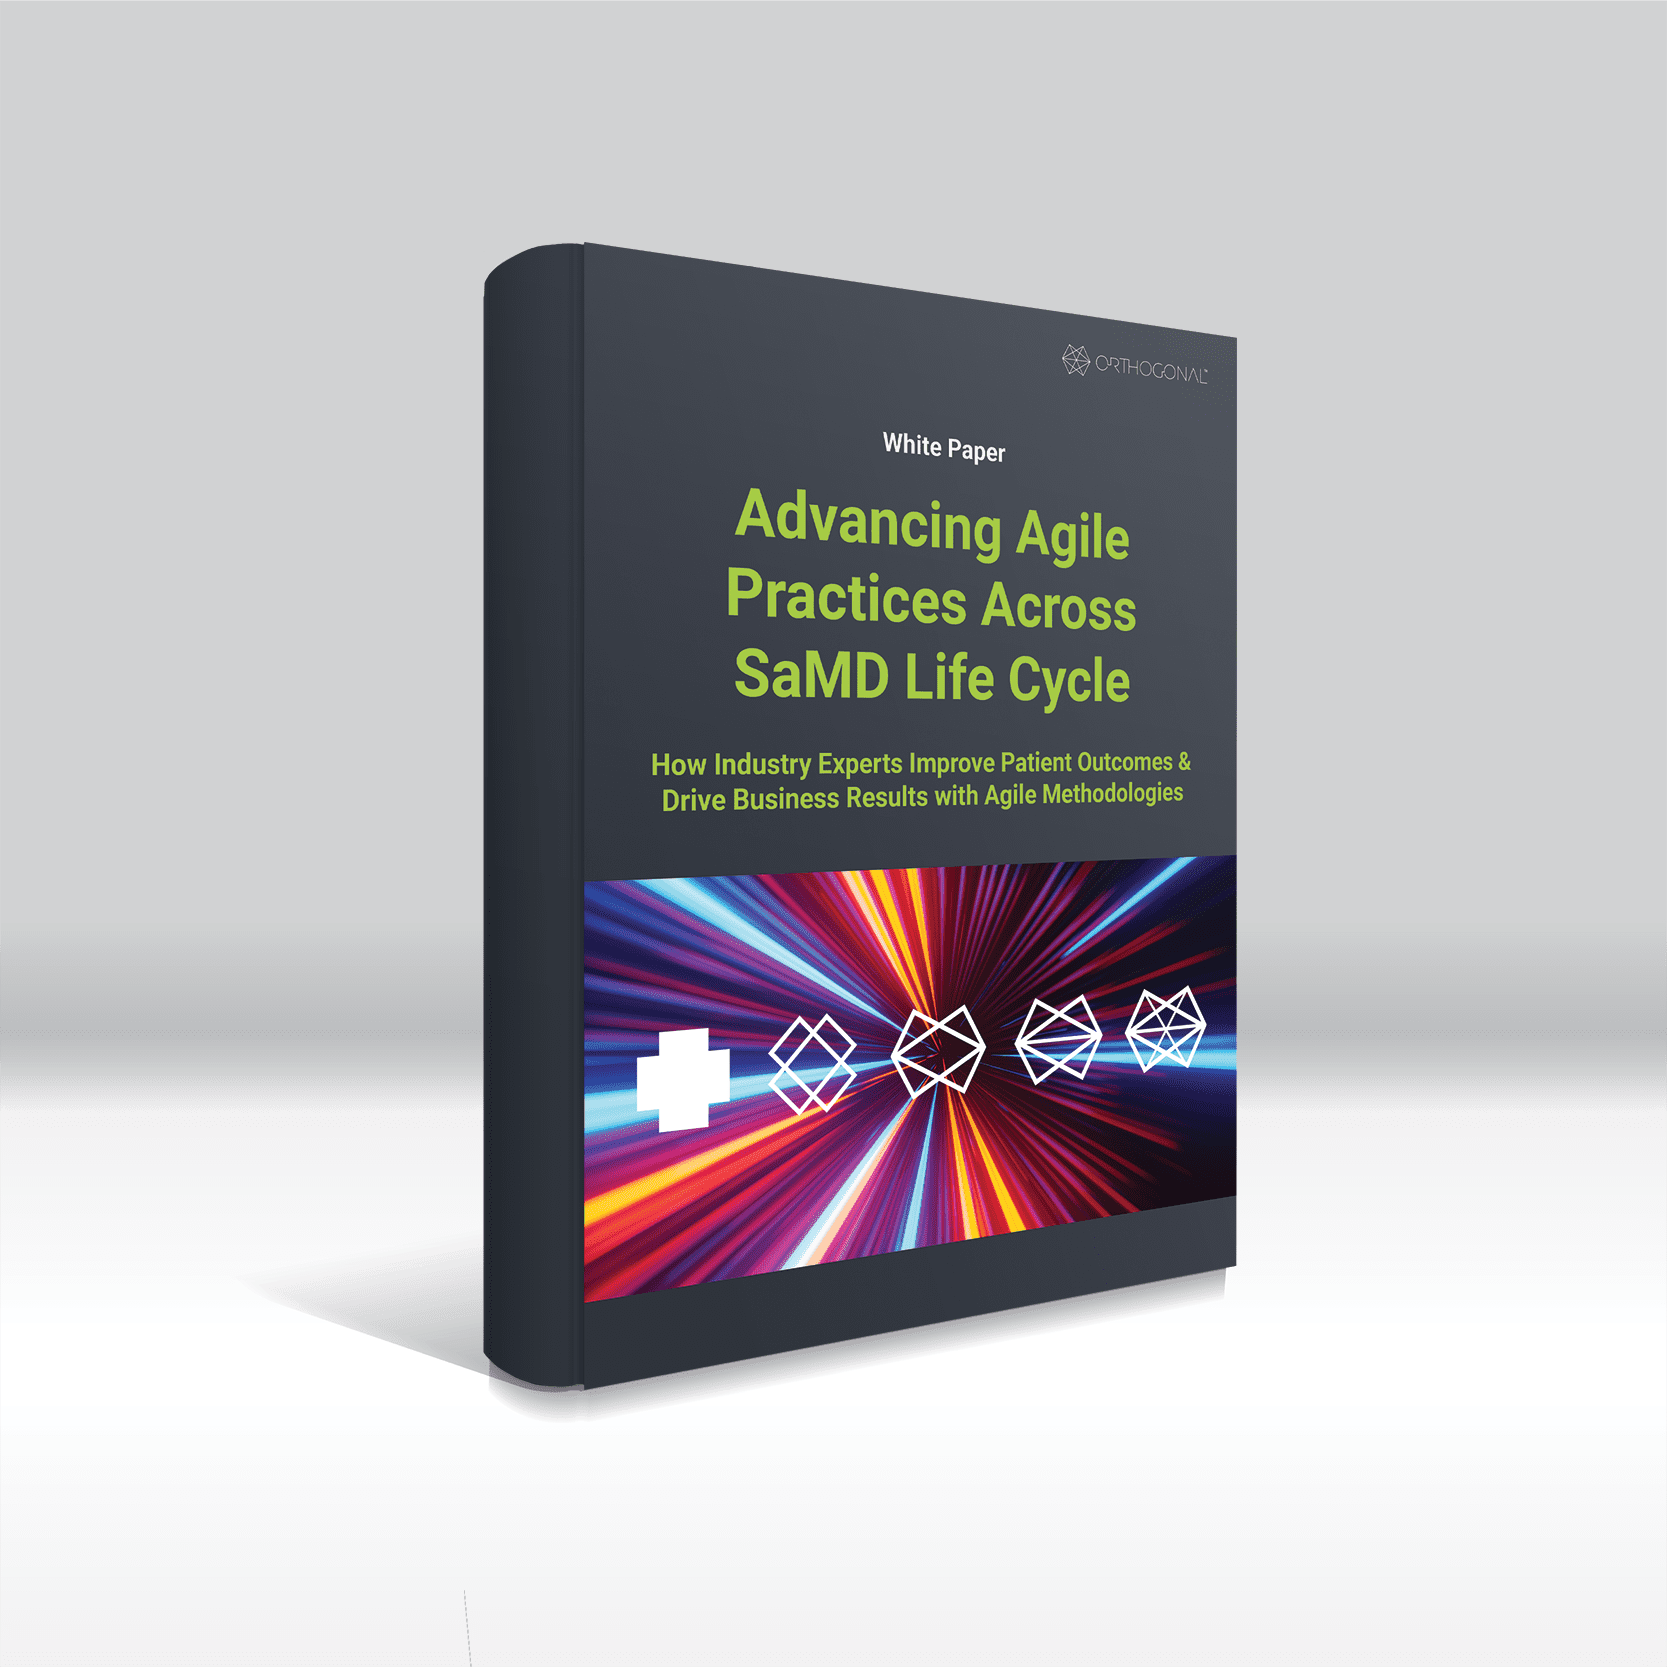 White Paper - Advancing Agile Practices Across SaMD Life Cycle eBook mockup